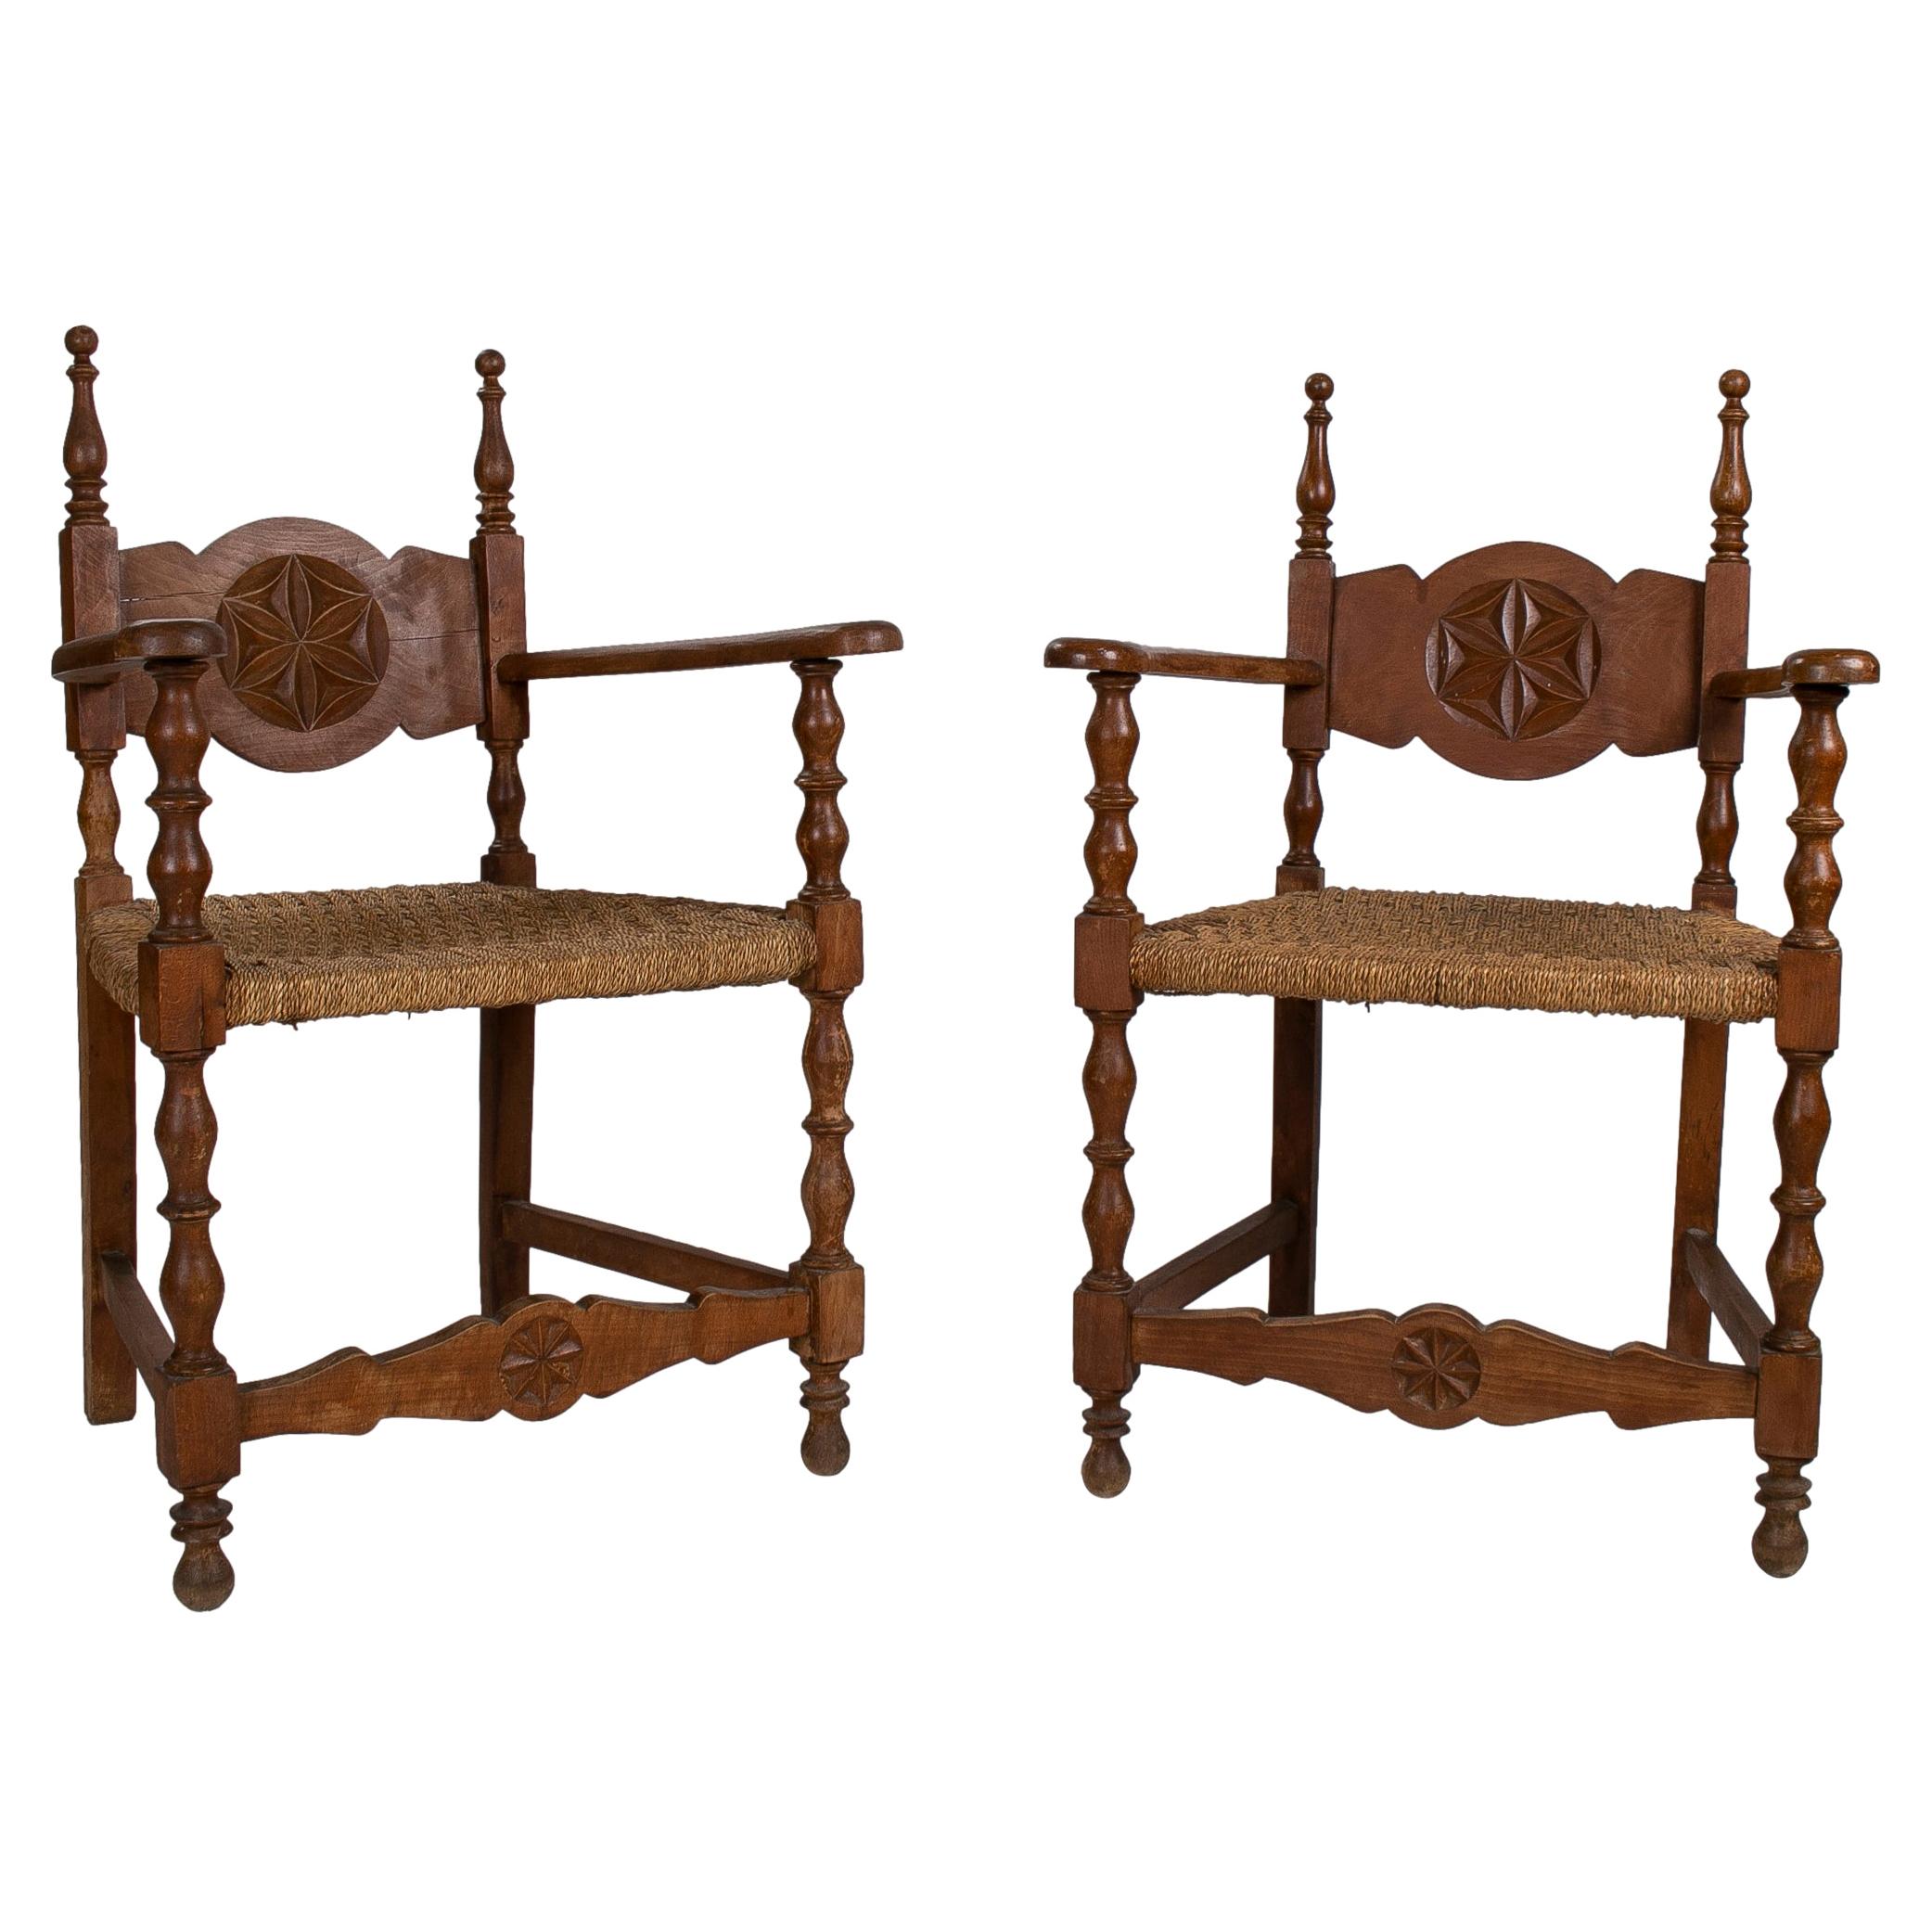 Pair of 1950s Spanish Wooden Chairs w/ Woven Dry Rope Seats For Sale